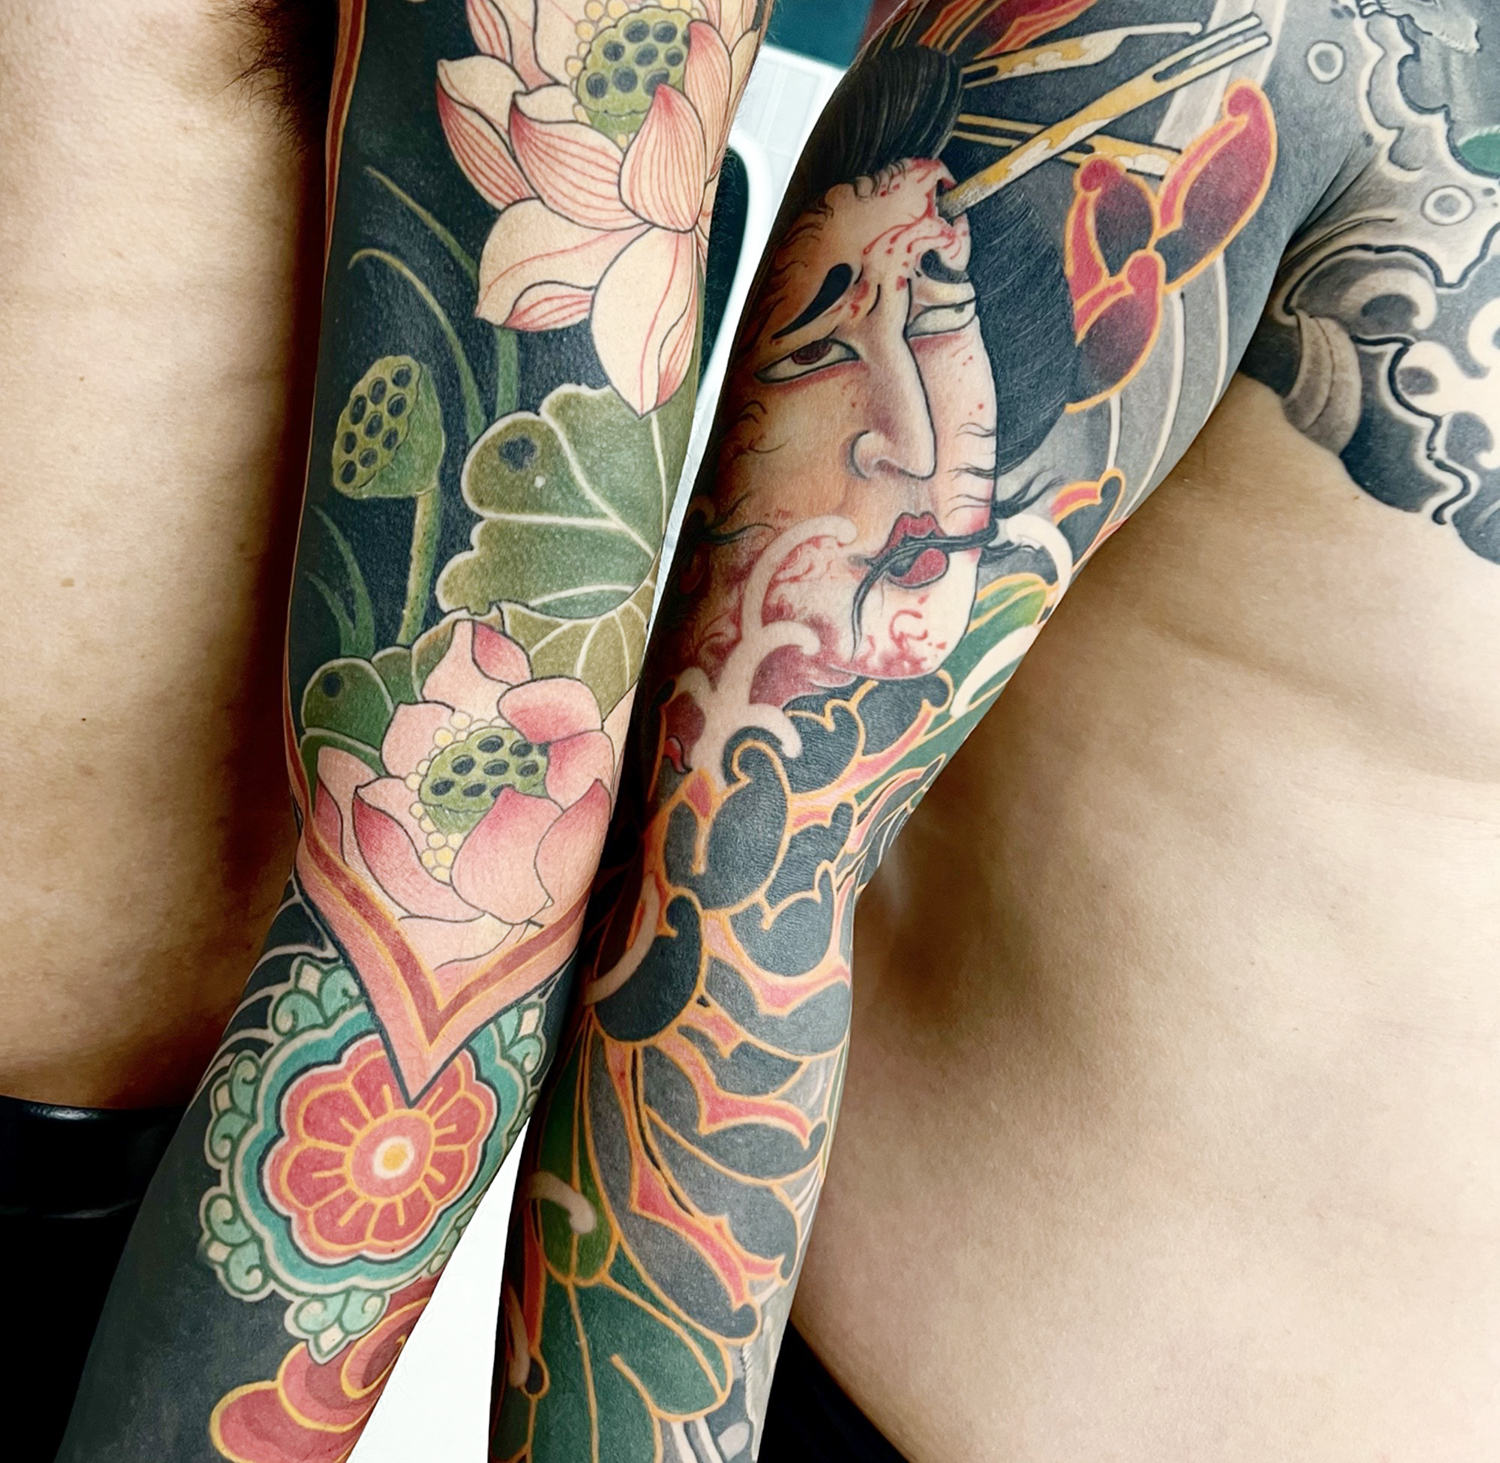 One sleeve has lotuses and the other features chrysanthemums.